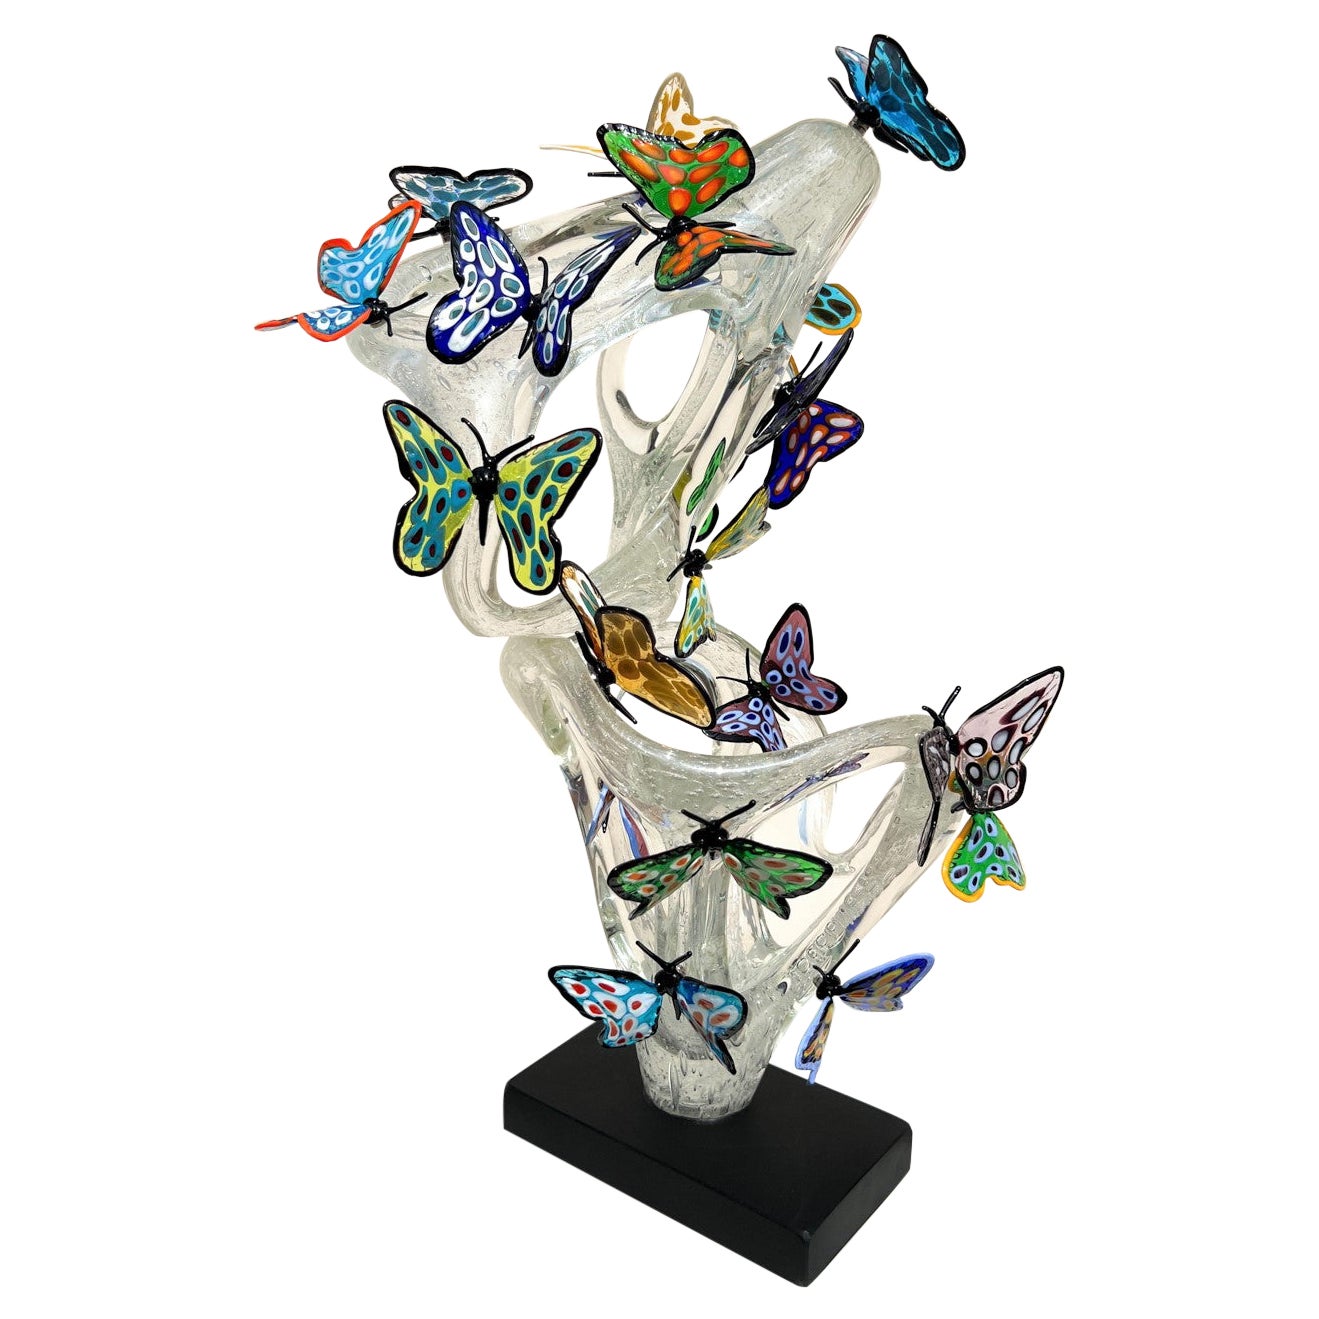 Costantini Diego Modern Crystal Murano Glass Infinity Sculpture avec papillons